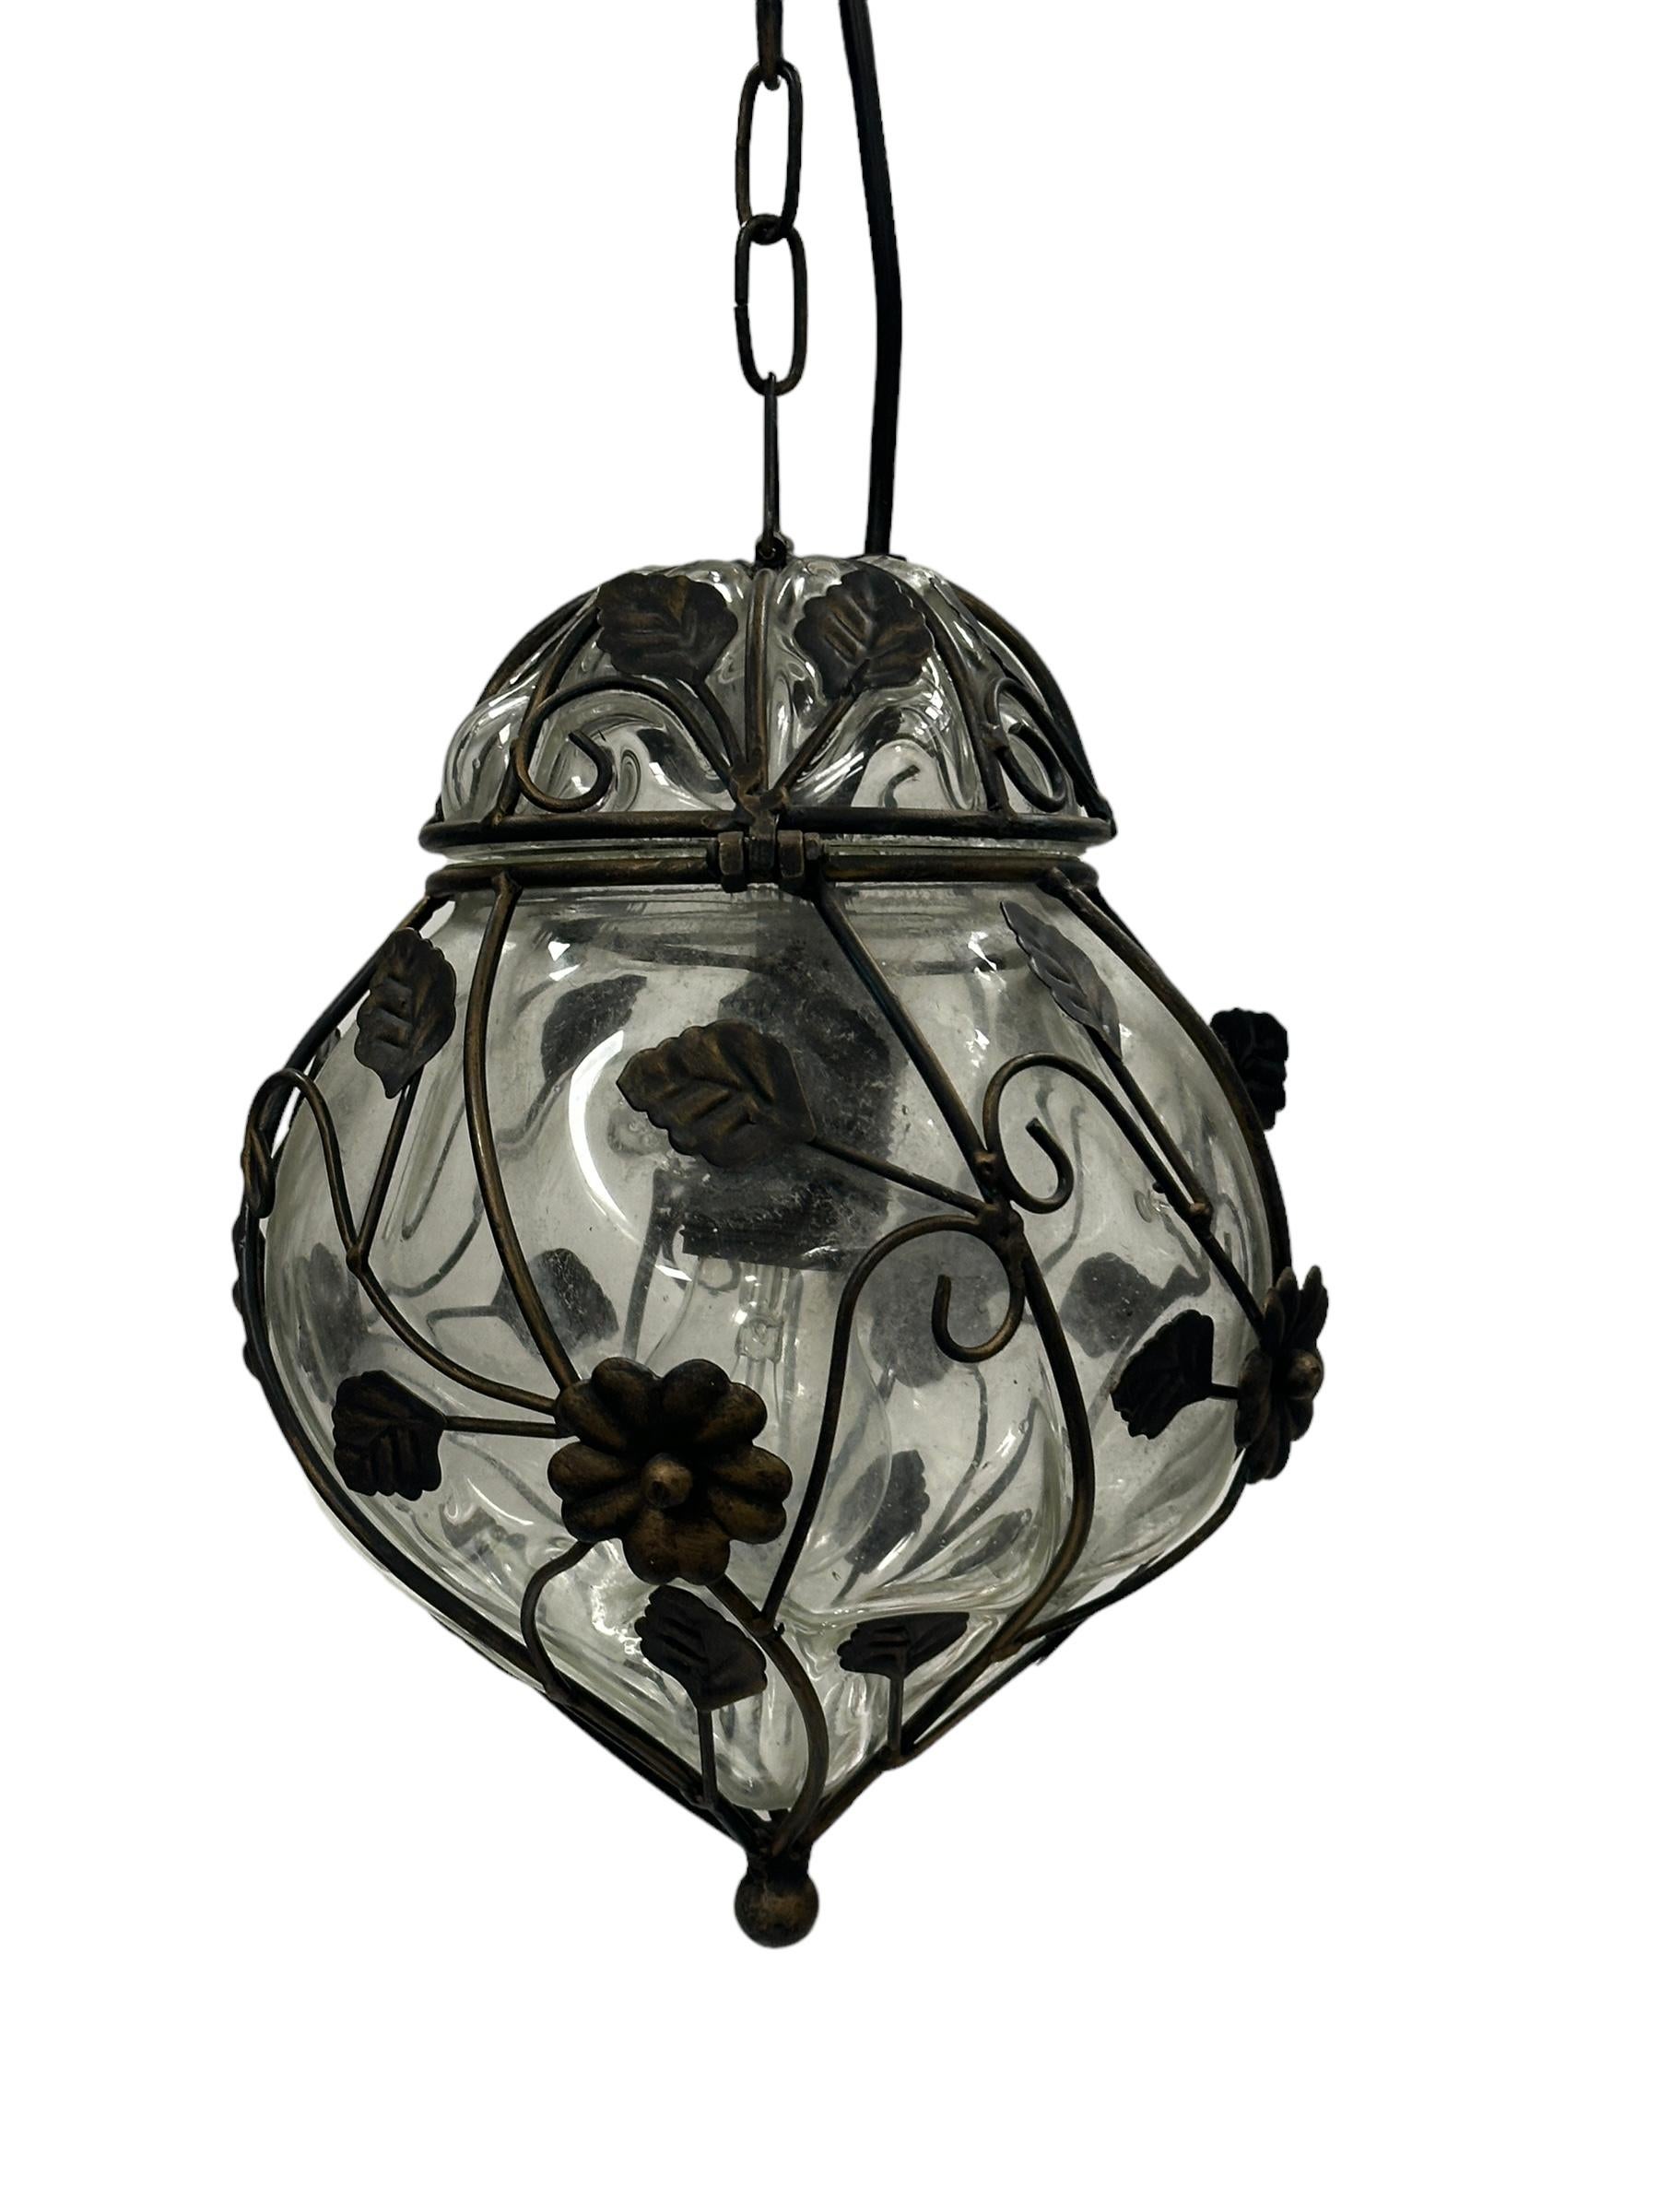 Gorgeous petite Pendant in bubble-wrapped Murano glass with cage. The glass is hand-blown with an clear tint and was created by a murano manufacturer during the 1960s in Italy.

This Murano glass bubble cage pendant with oriental style and a 